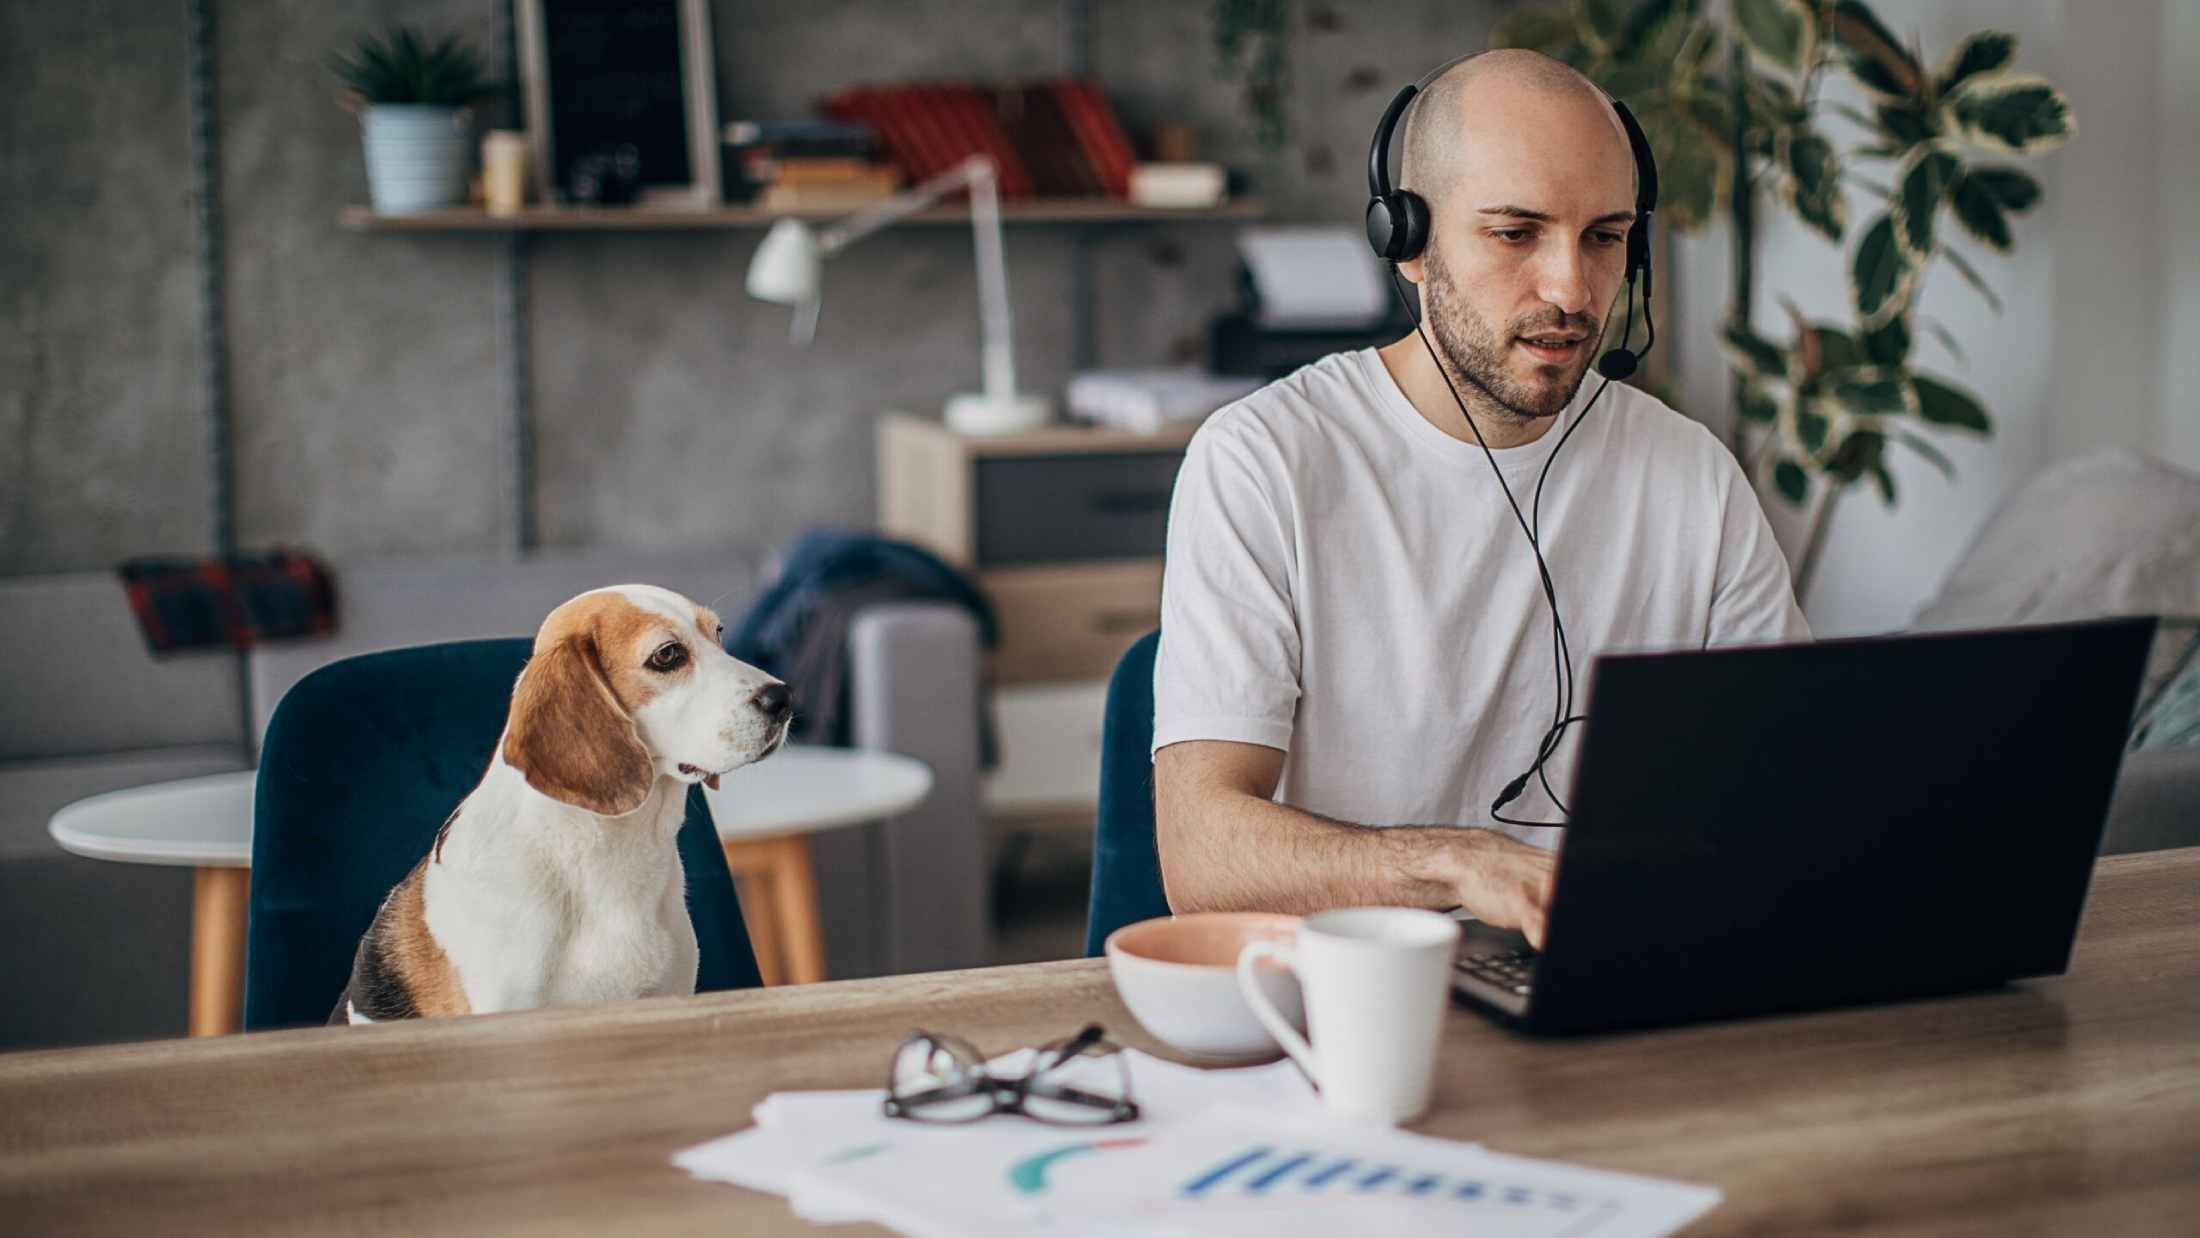 Middle aged man working on his laptop while a dog watches